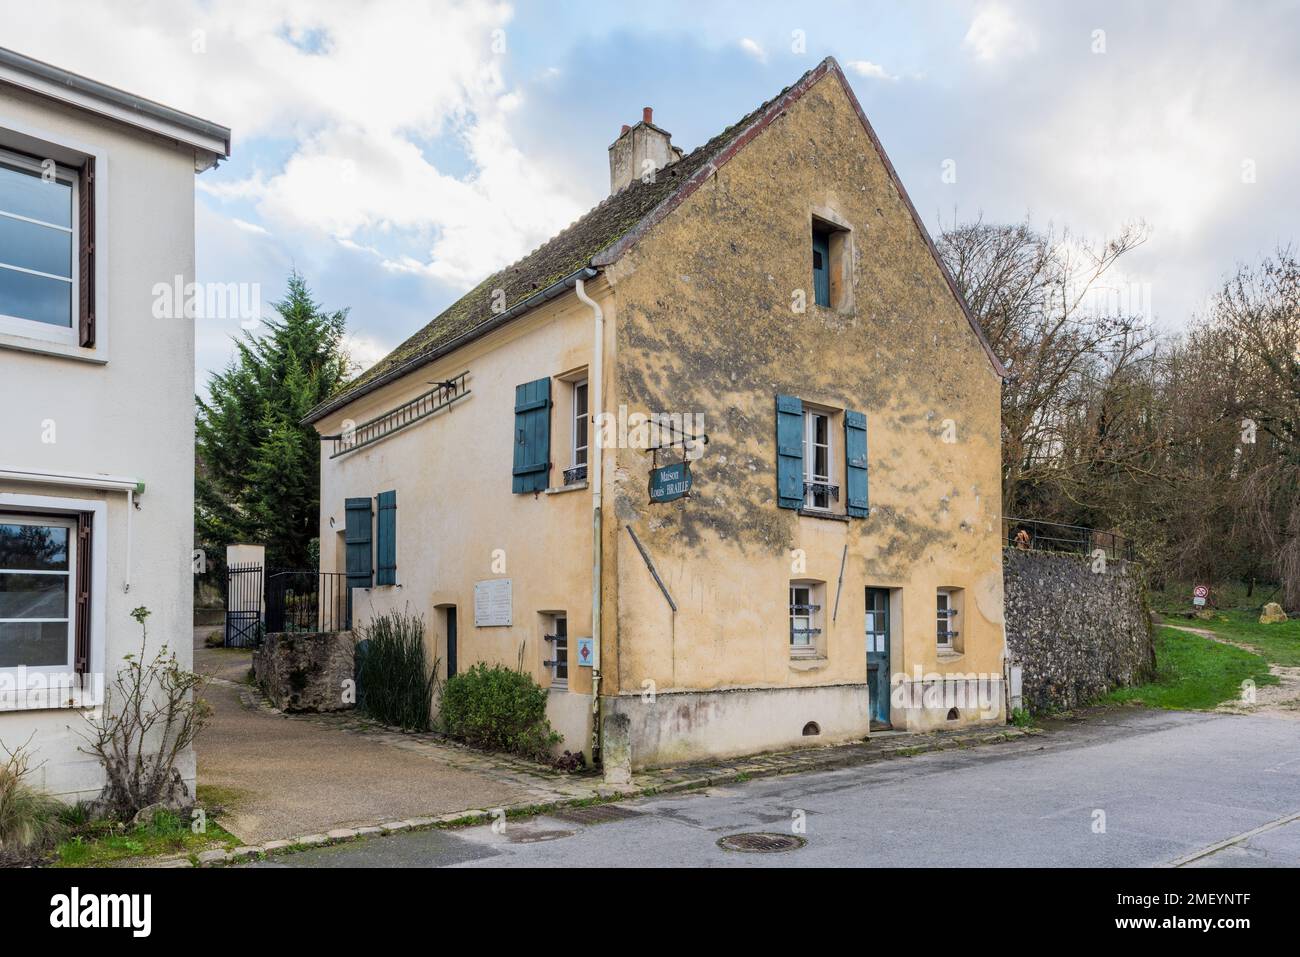 Birthplace of Louis Braille in Coupvray, France. He invented the braille system, intended for use by visually impaired people. Stock Photo